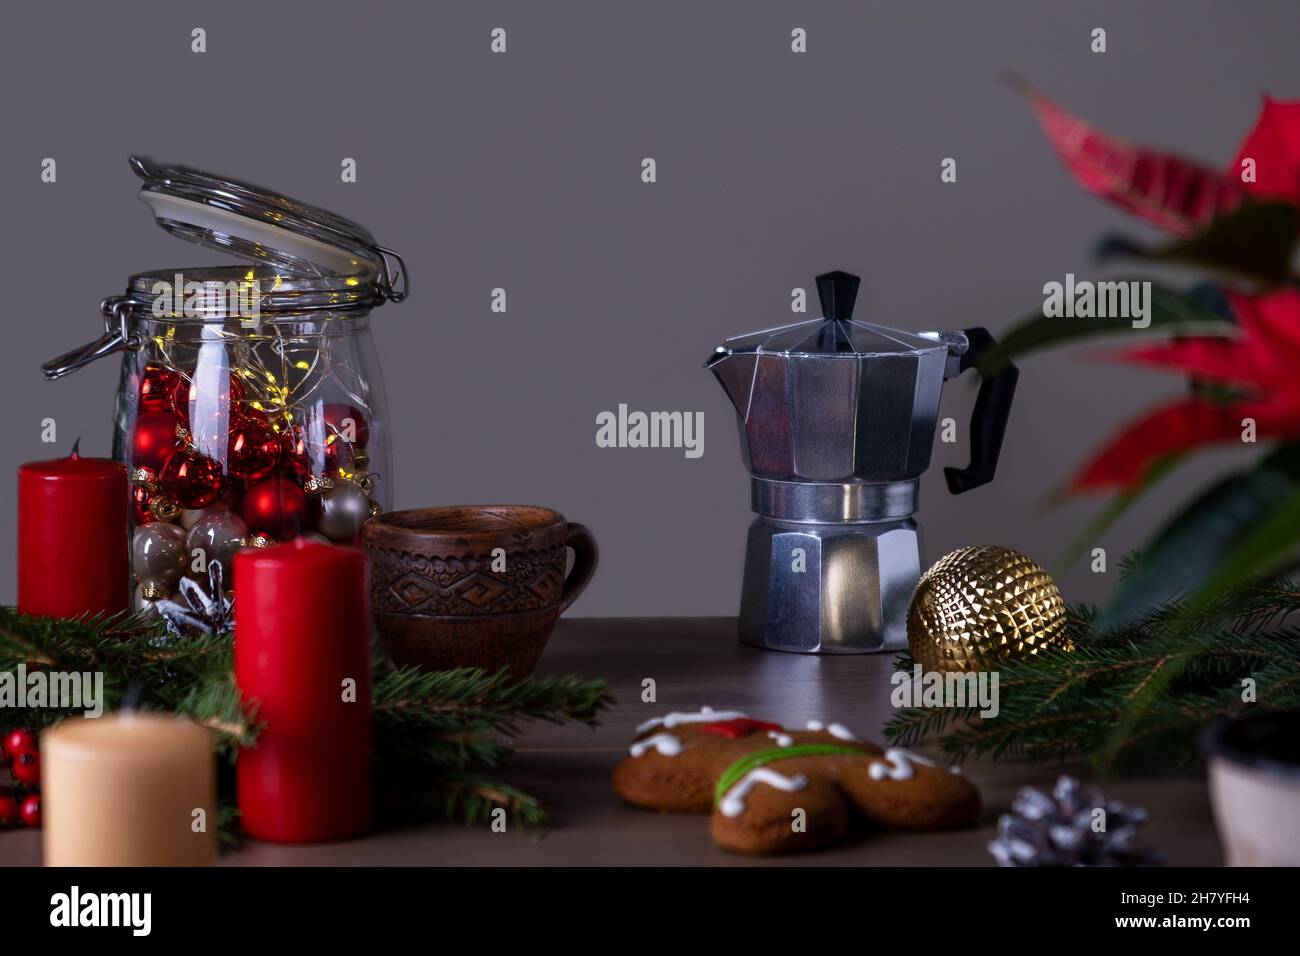 Christmas decor and geyser coffee maker with small ceramic cup. Stock Photo